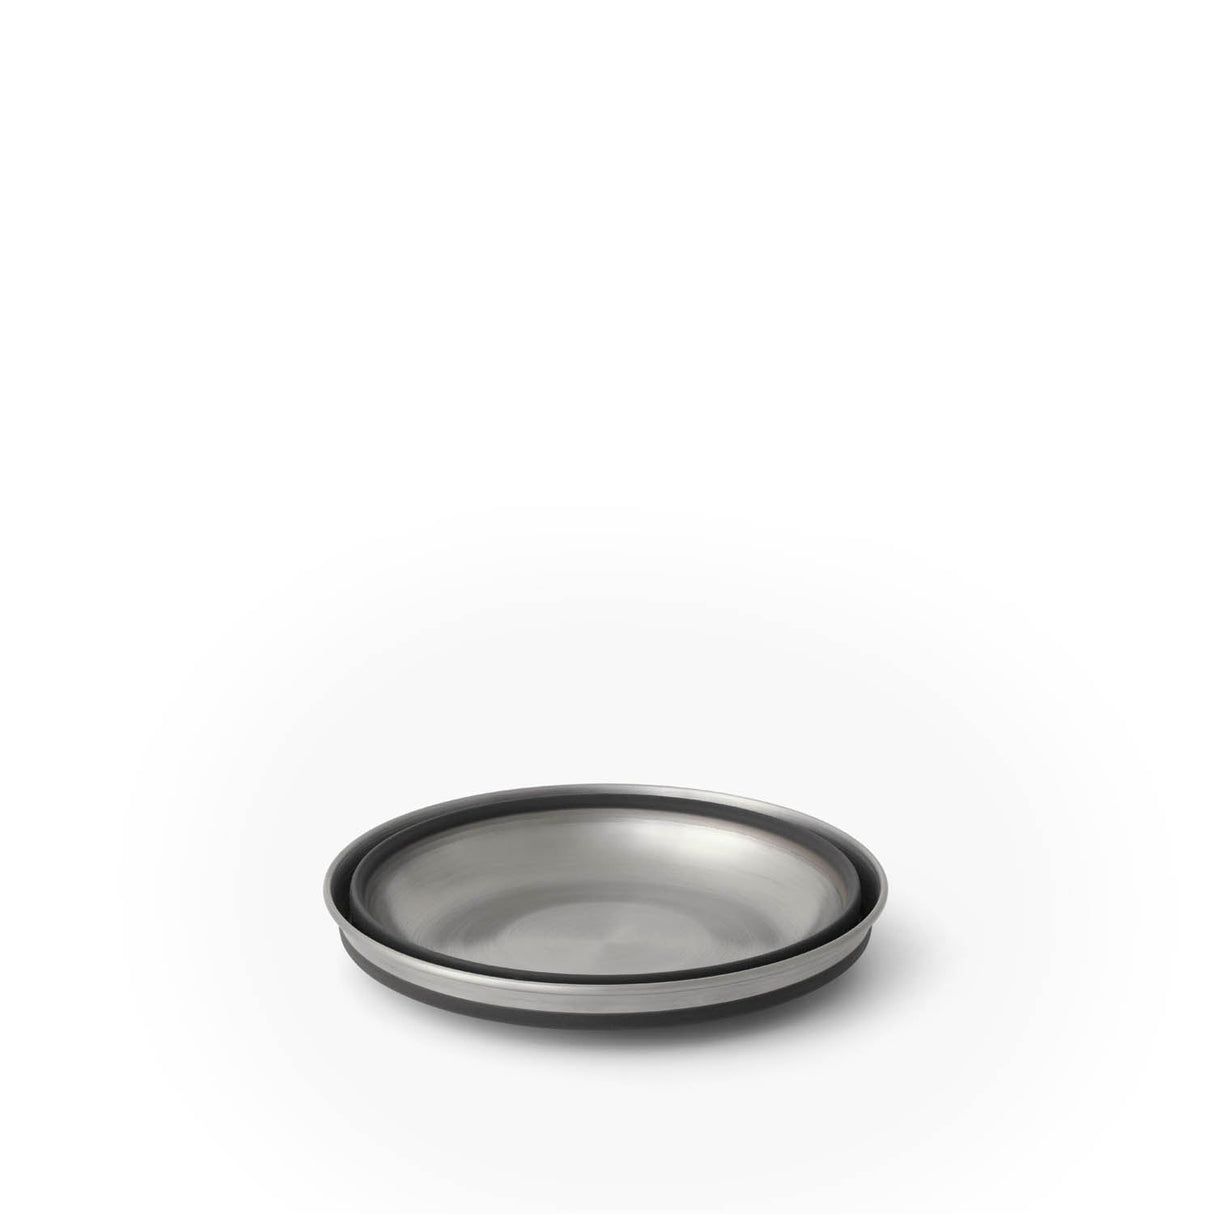 Detour Stainless Steel Collapsible Bowl